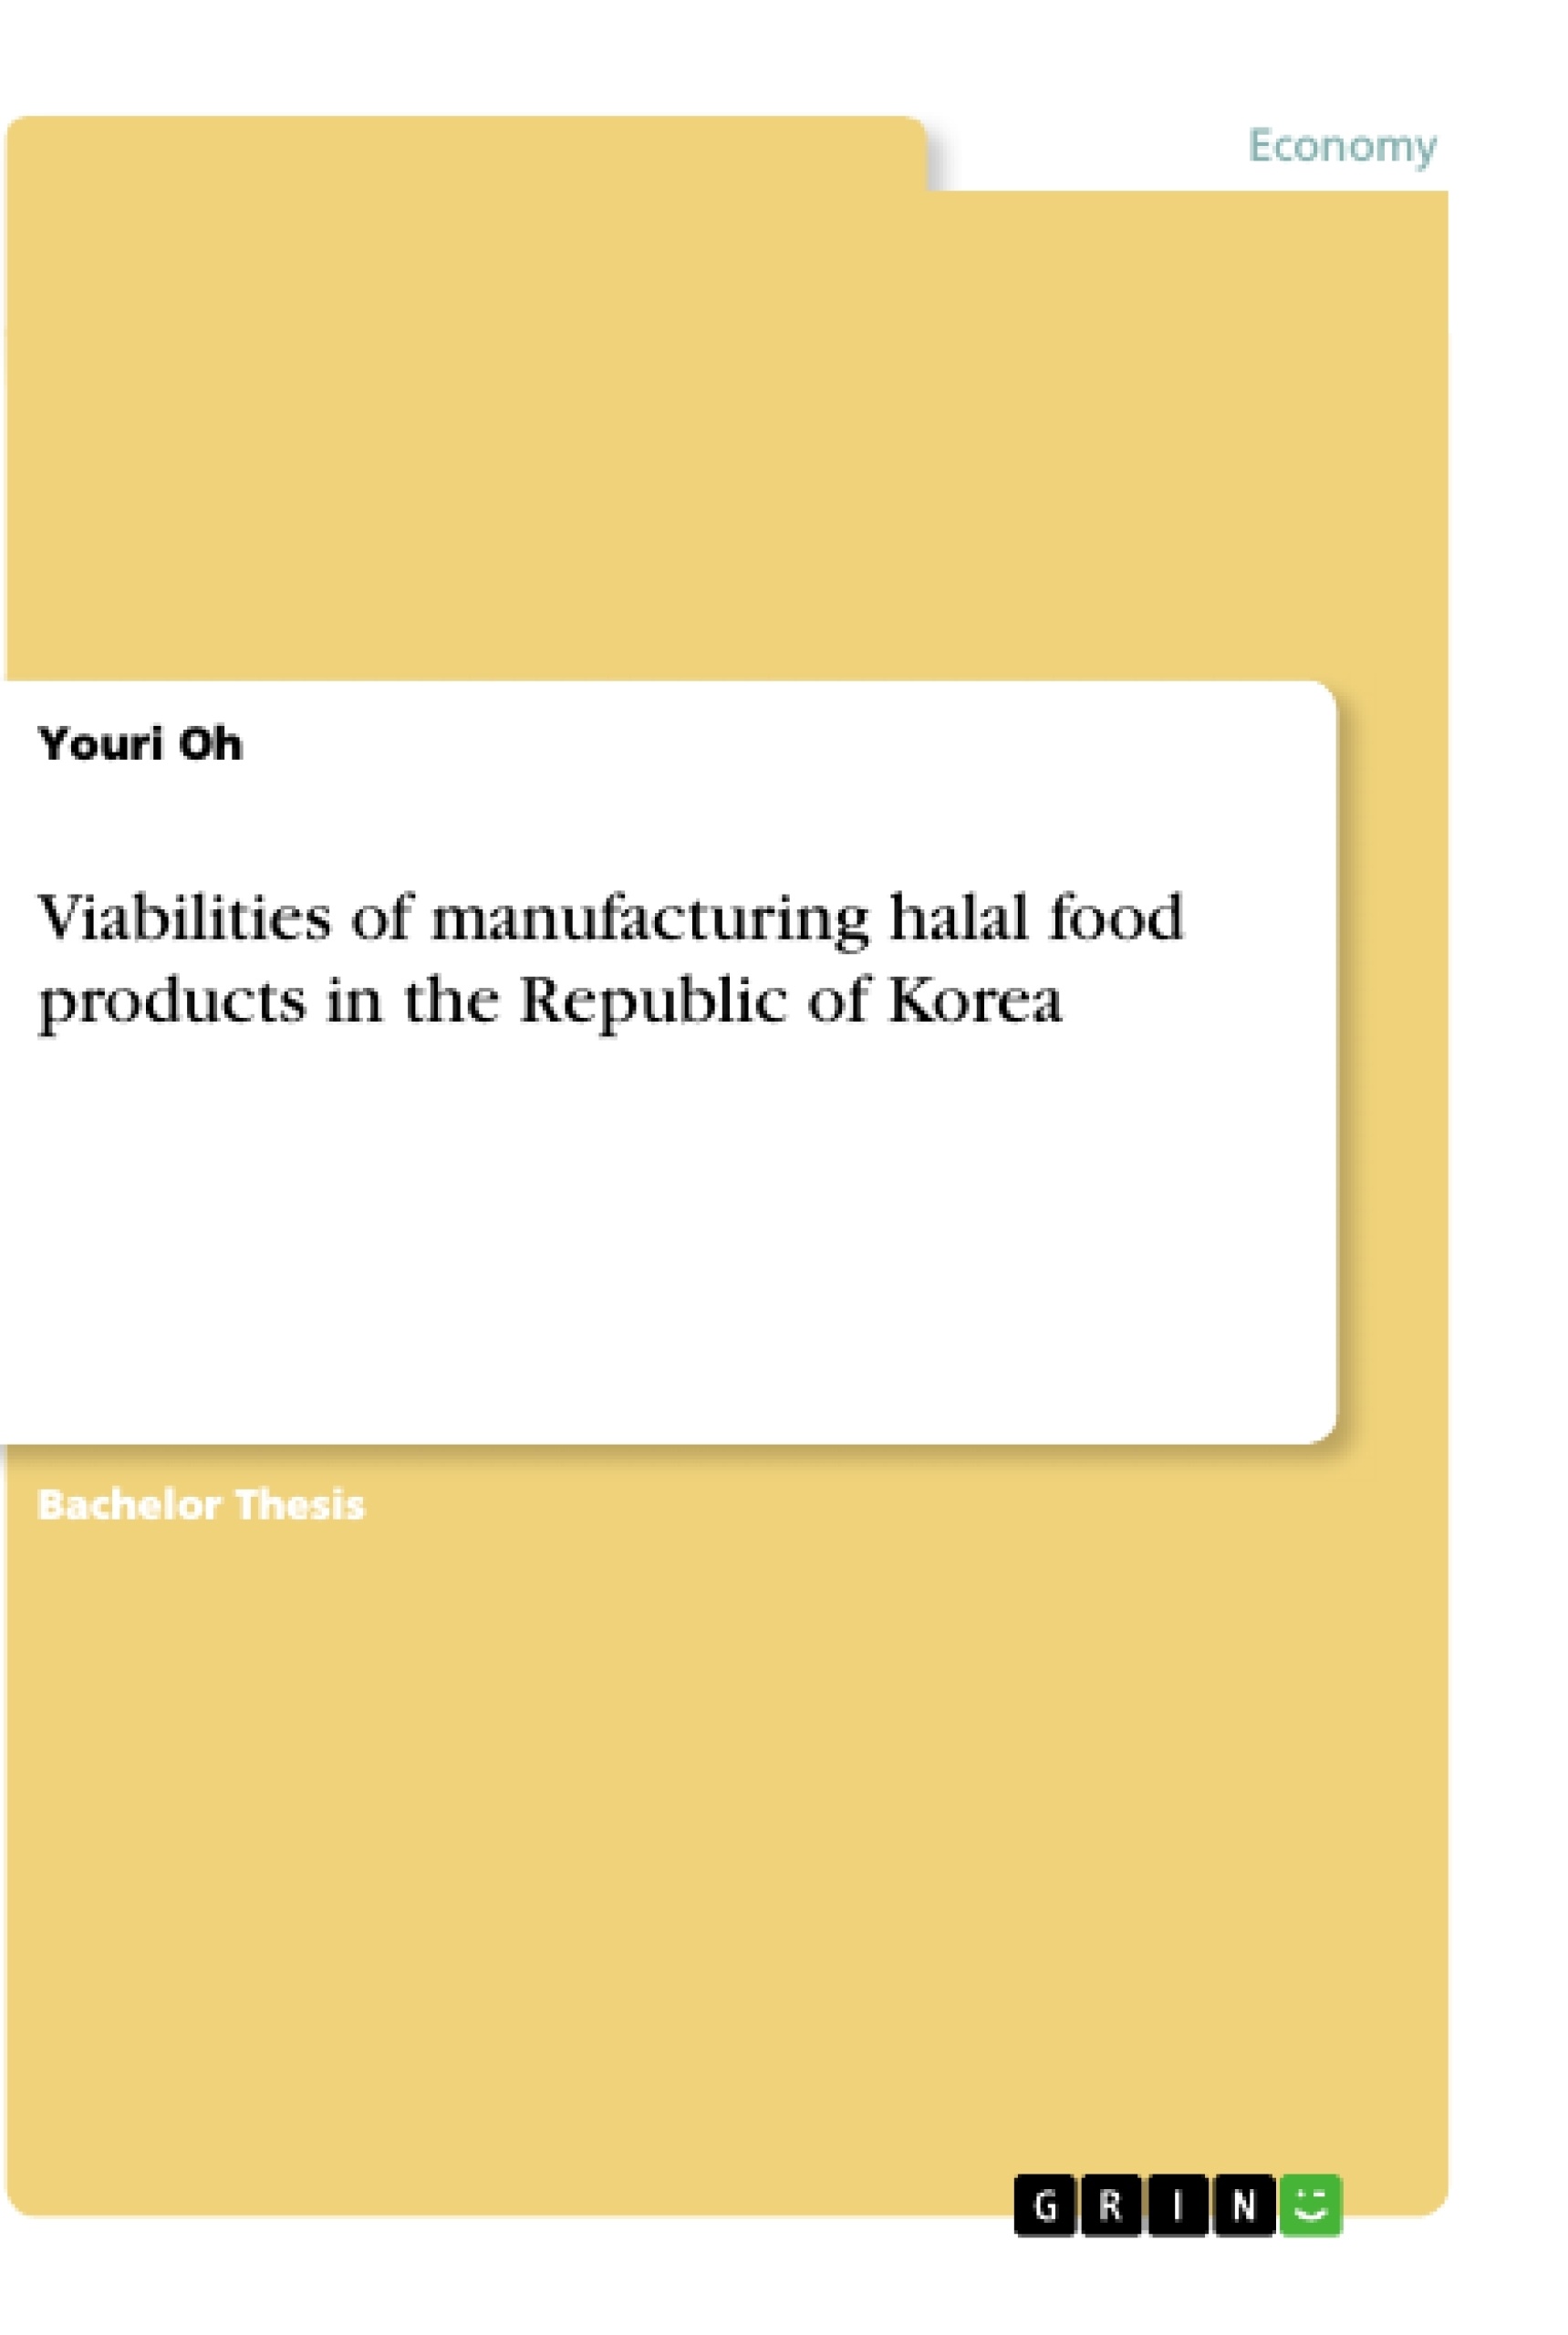 Title: Viabilities of manufacturing halal food products in the Republic of Korea